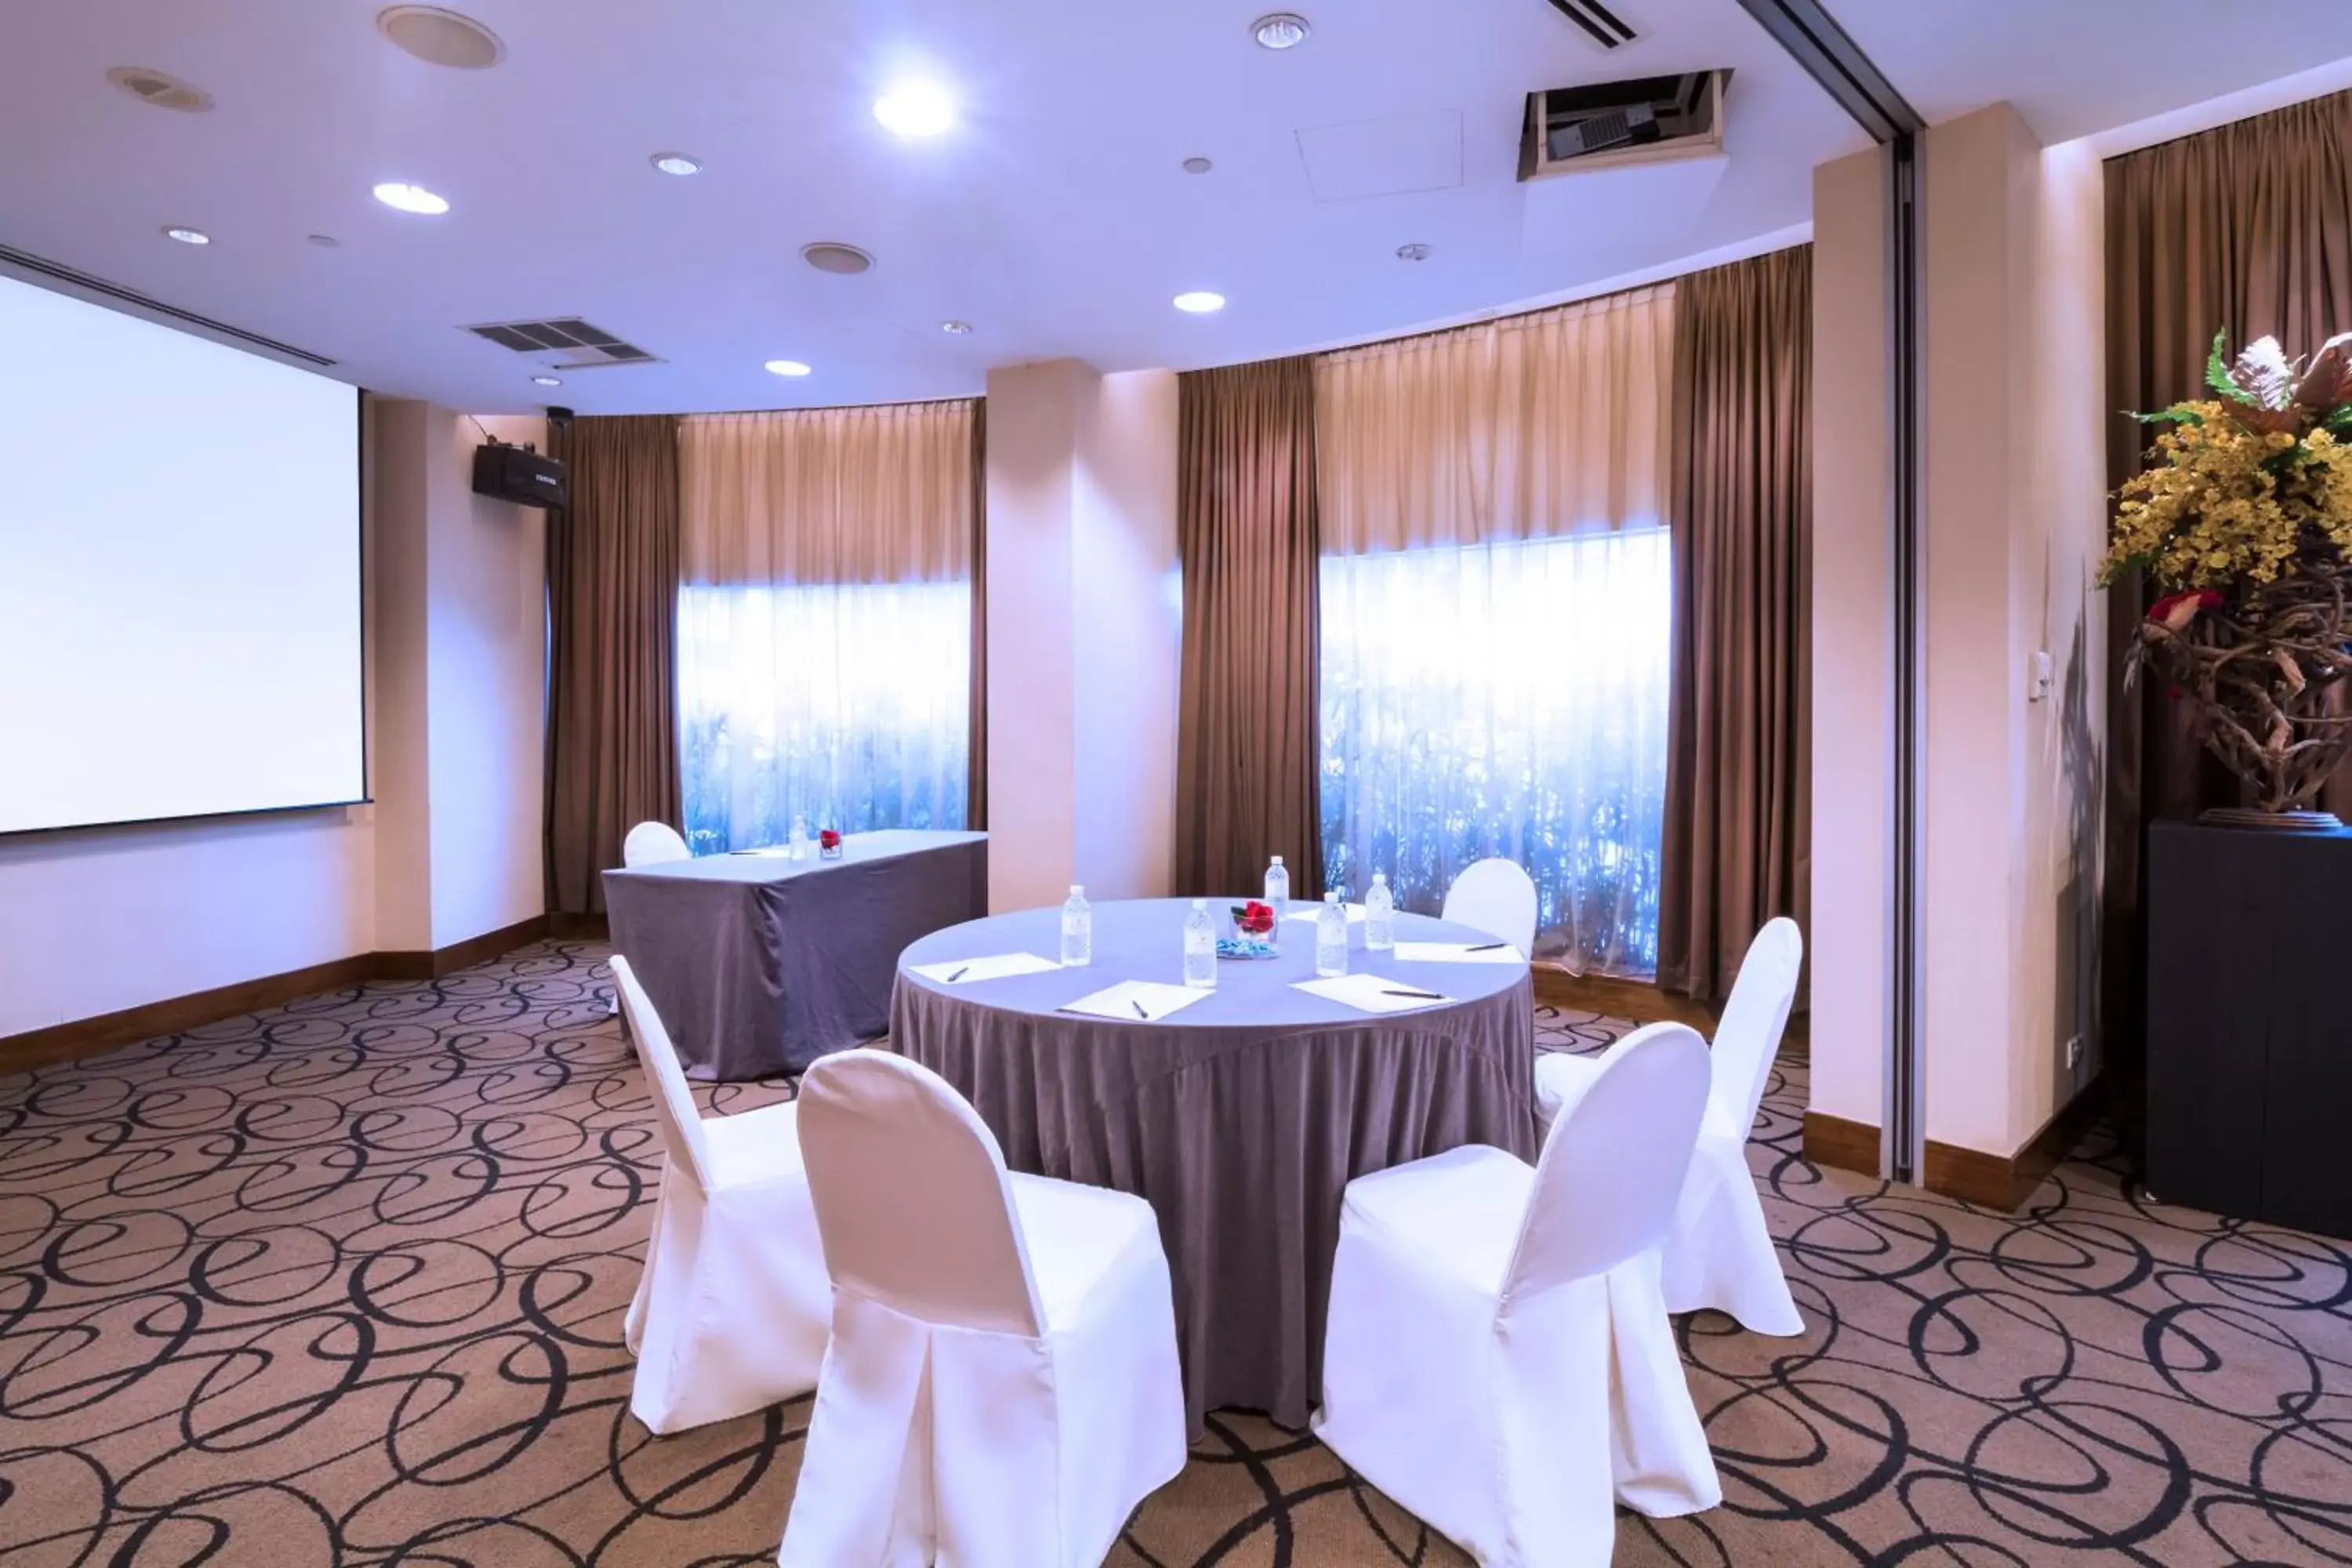 Banquet/Function facilities, Banquet Facilities in Copthorne King's Hotel Singapore on Havelock